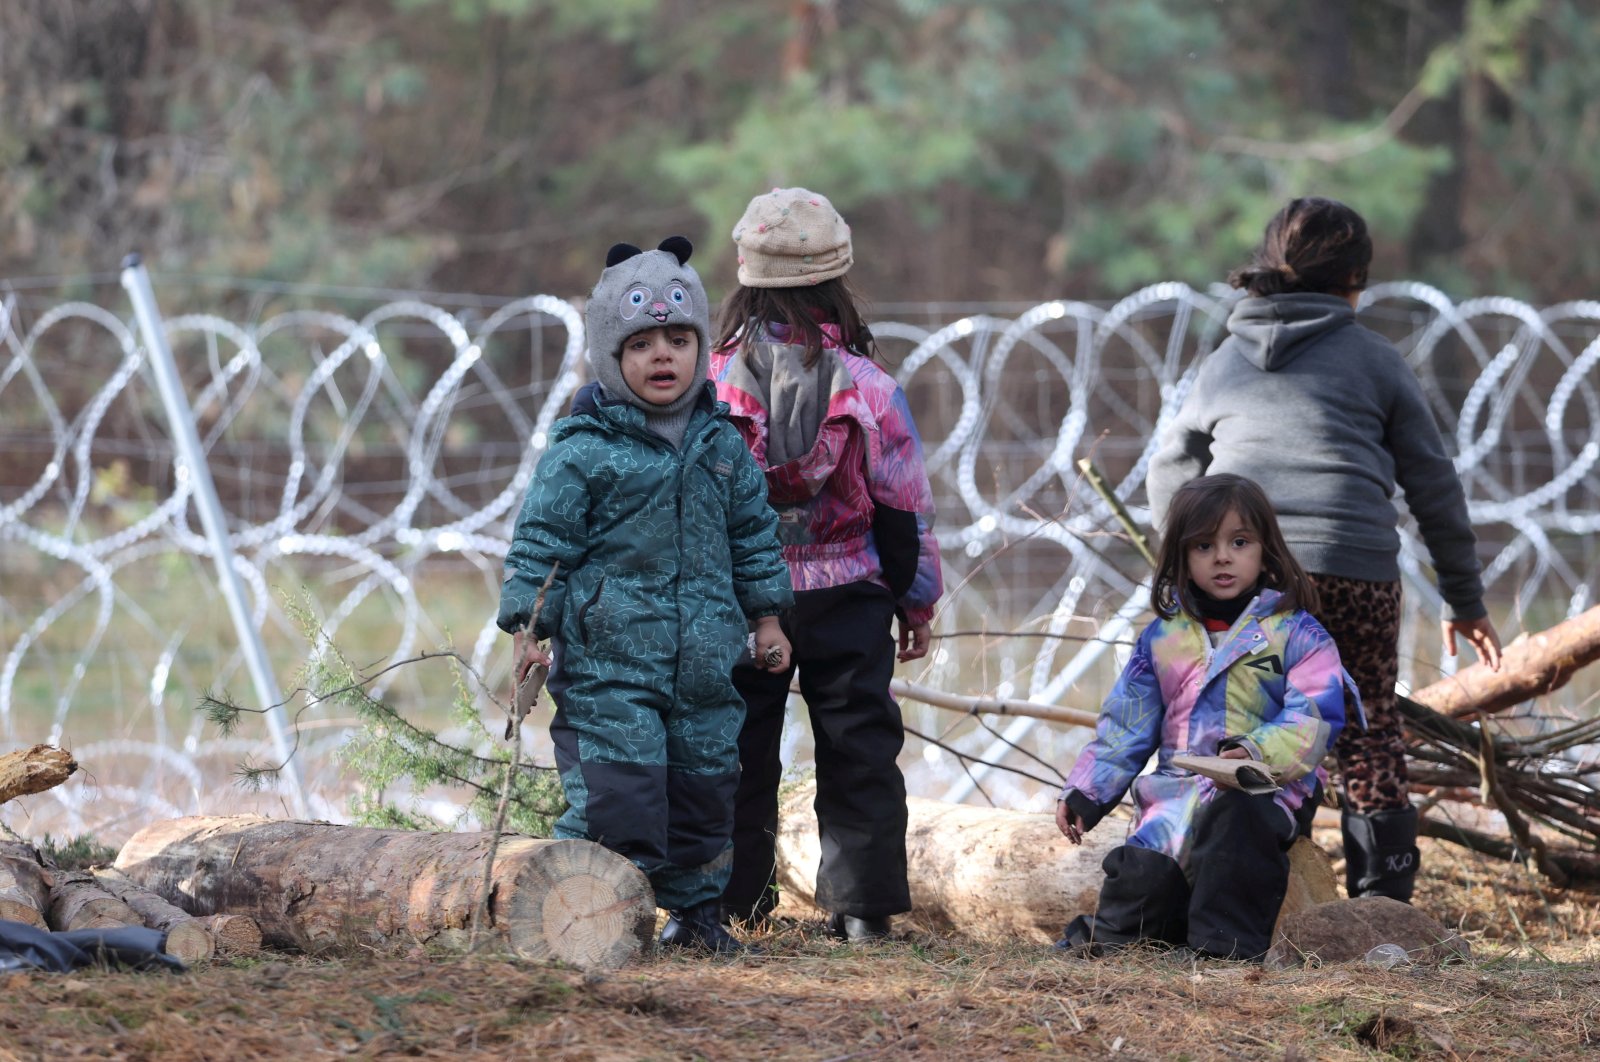 Children gather near a barbed wire fence in a migrants' makeshift camp on the Belarusian-Polish border in the Grodno region, Belarus, Nov. 12, 2021. (Reuters Photo)